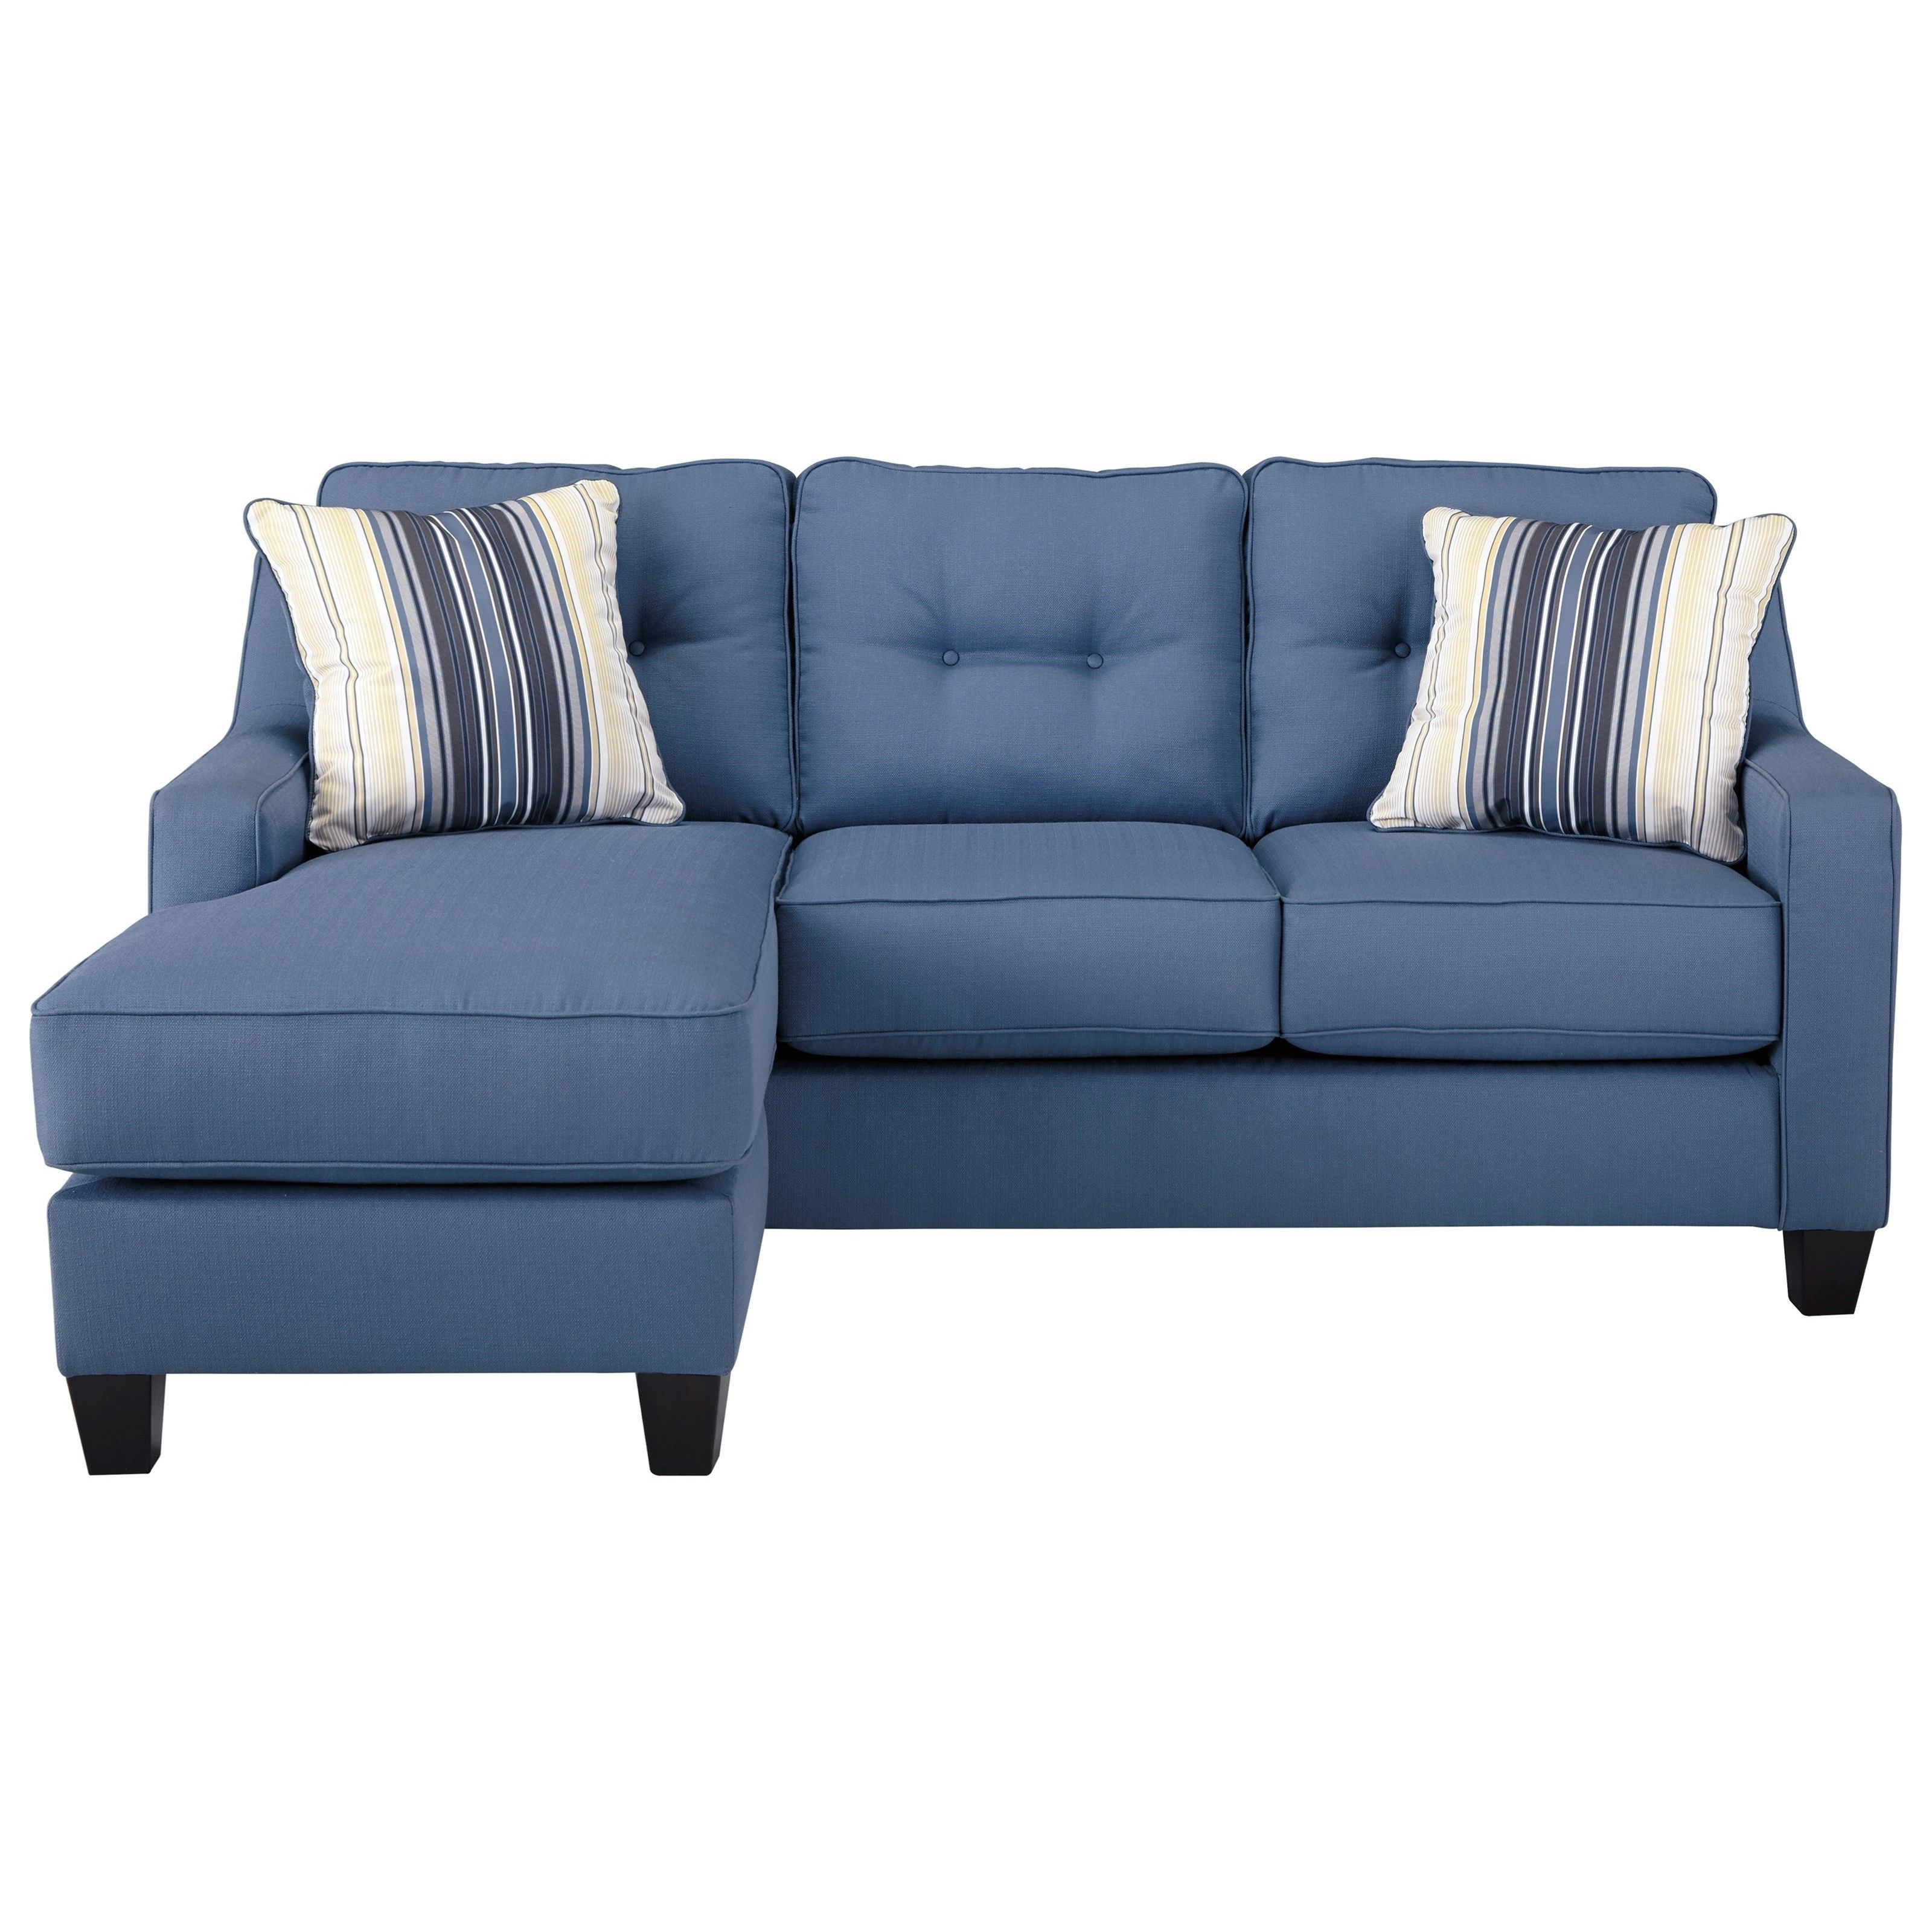 Latest Benchcraft Aldie Nuvella Queen Sofa Chaise Sleeper In Performance In Chaise Sleepers (View 15 of 15)